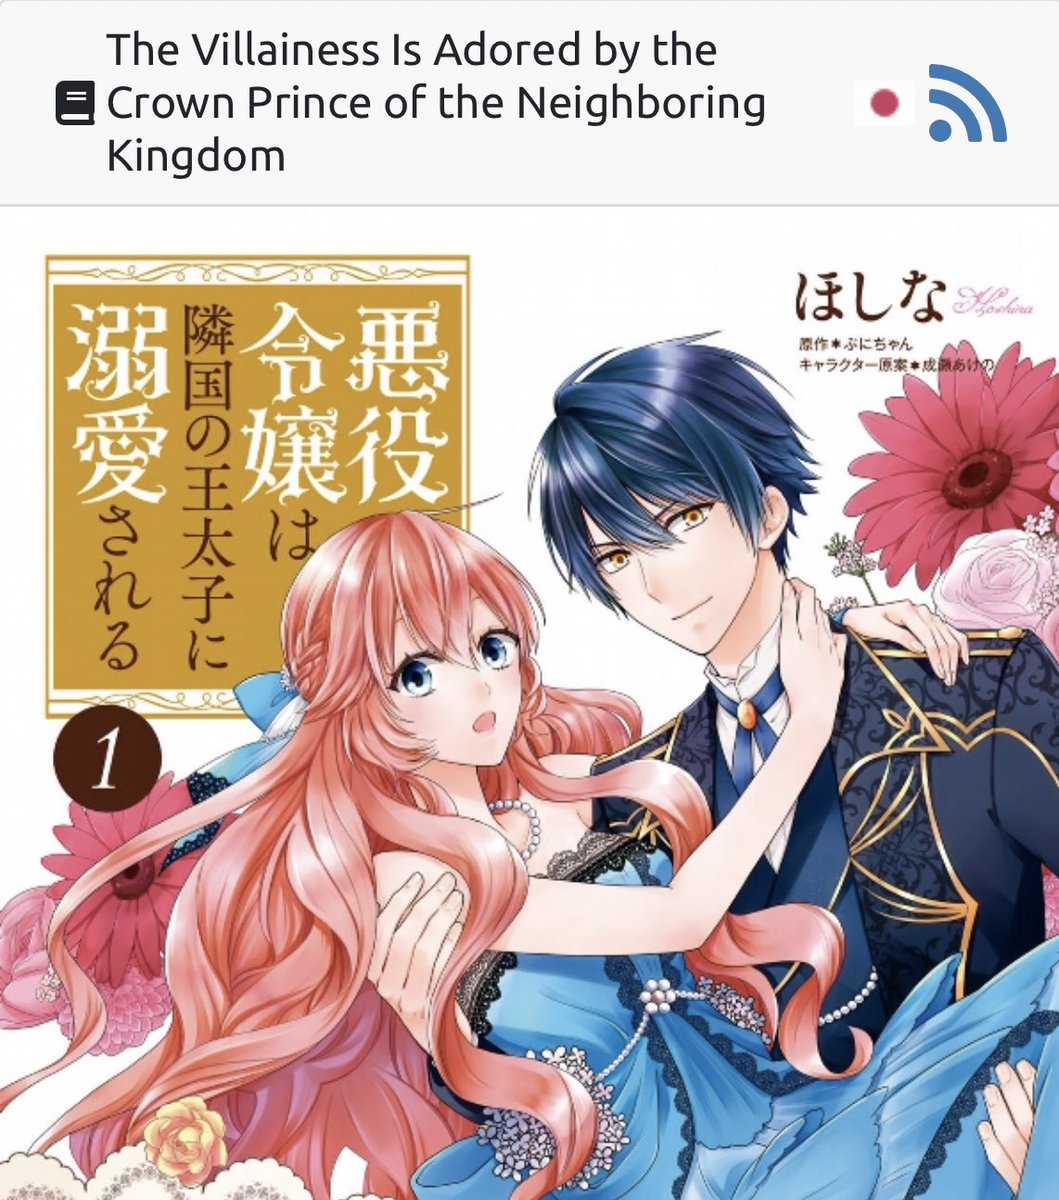 Just when she realized it was the same otome she was playing, the ending was there. But the unexpected event happened when the neighboring kingdom’s prince just stepped up to rescue Tianarose from being shamed by her fiancé and declared that he had been in love with her all along